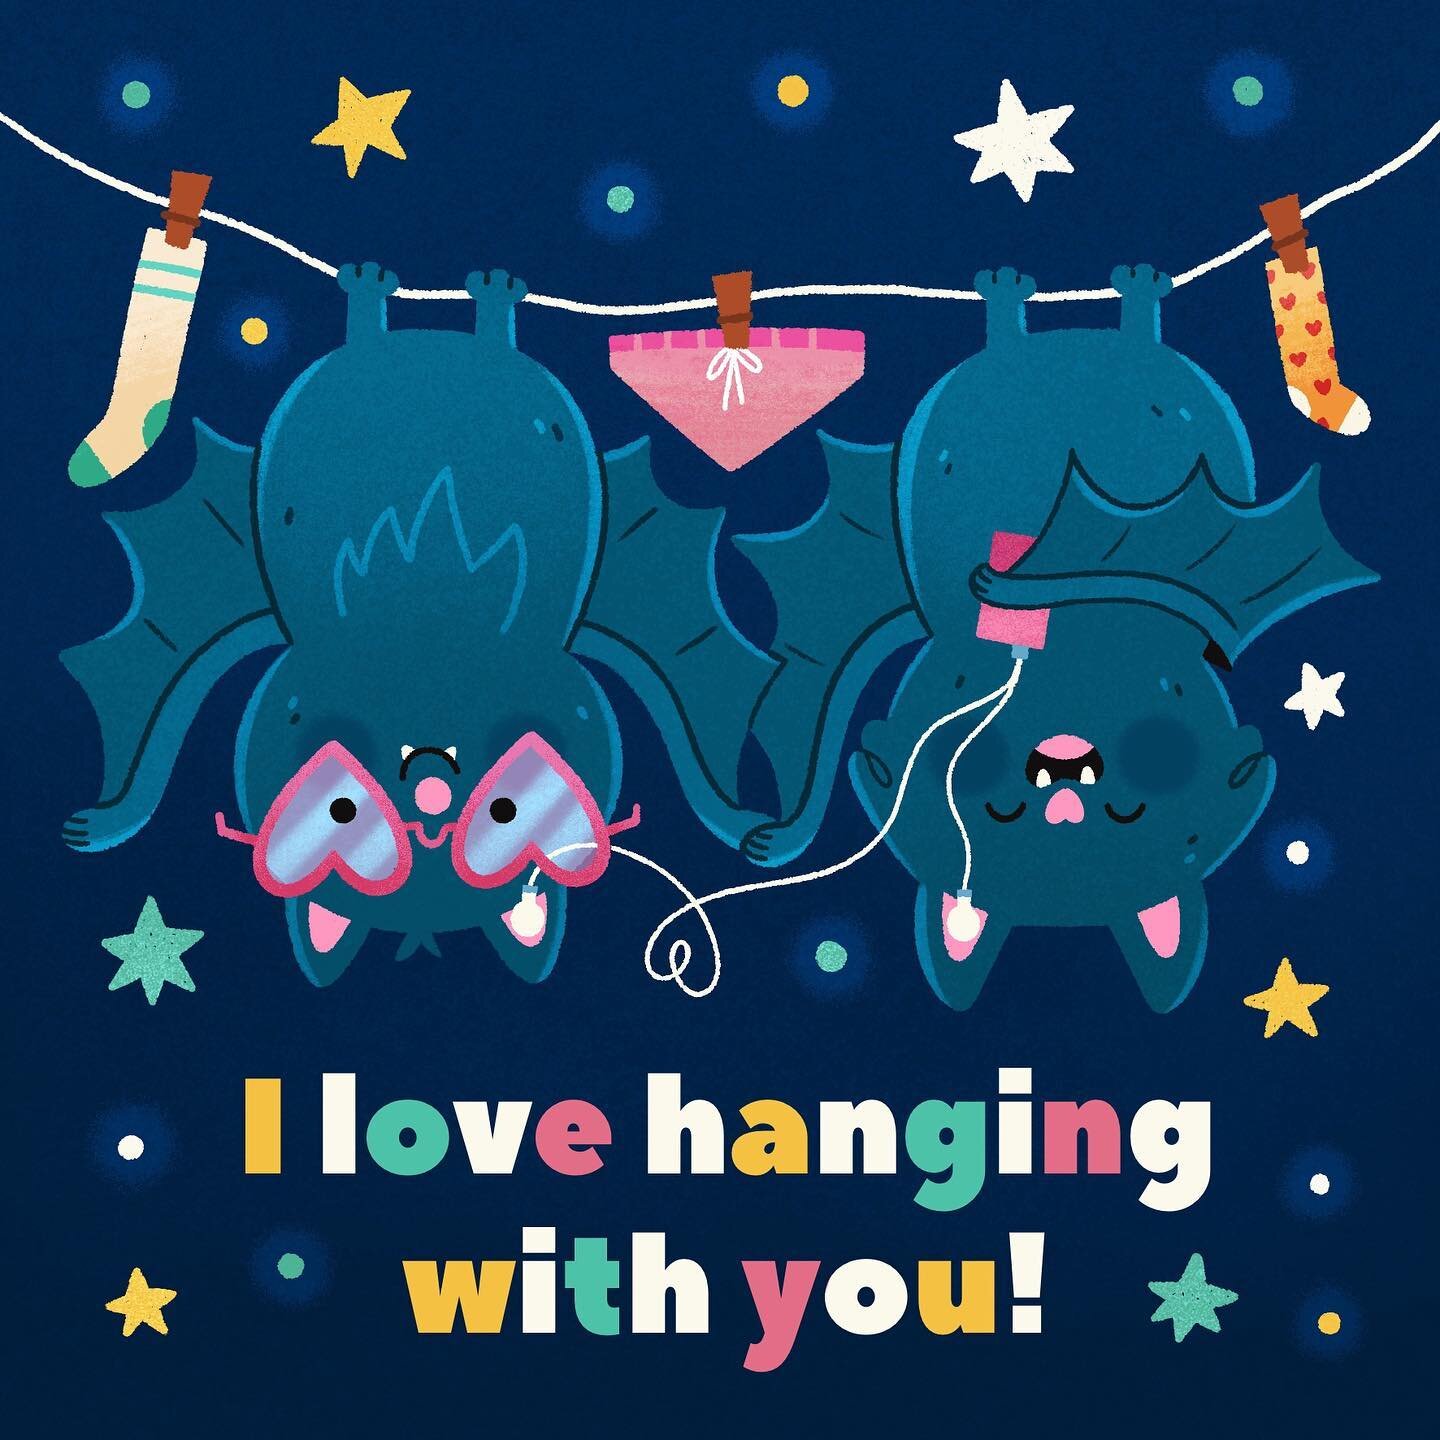 A card idea I did for fun this weekend 🦇 

I&rsquo;m available for commissions. My information can be found on my page :) 

.
.
.
.
.
.
.
.
.
.
.
.
.
#illustrator #greetingcards #greetingcard #greetingcarddesign #openforlicensing #lovecard #cuteillu